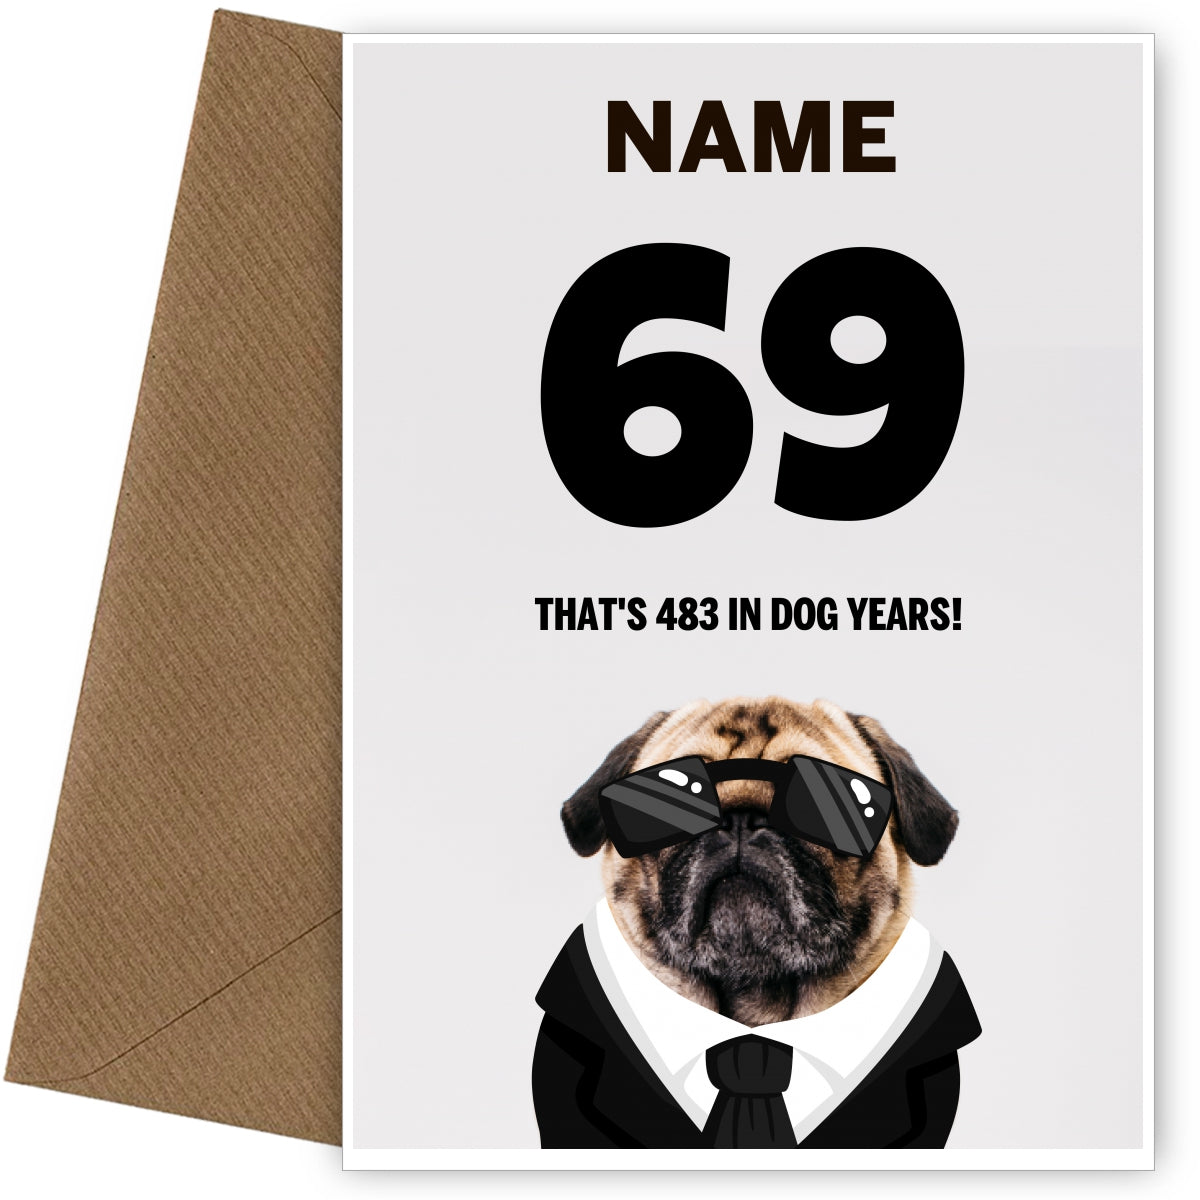 Happy 69th Birthday Card - 69 is 483 in Dog Years!